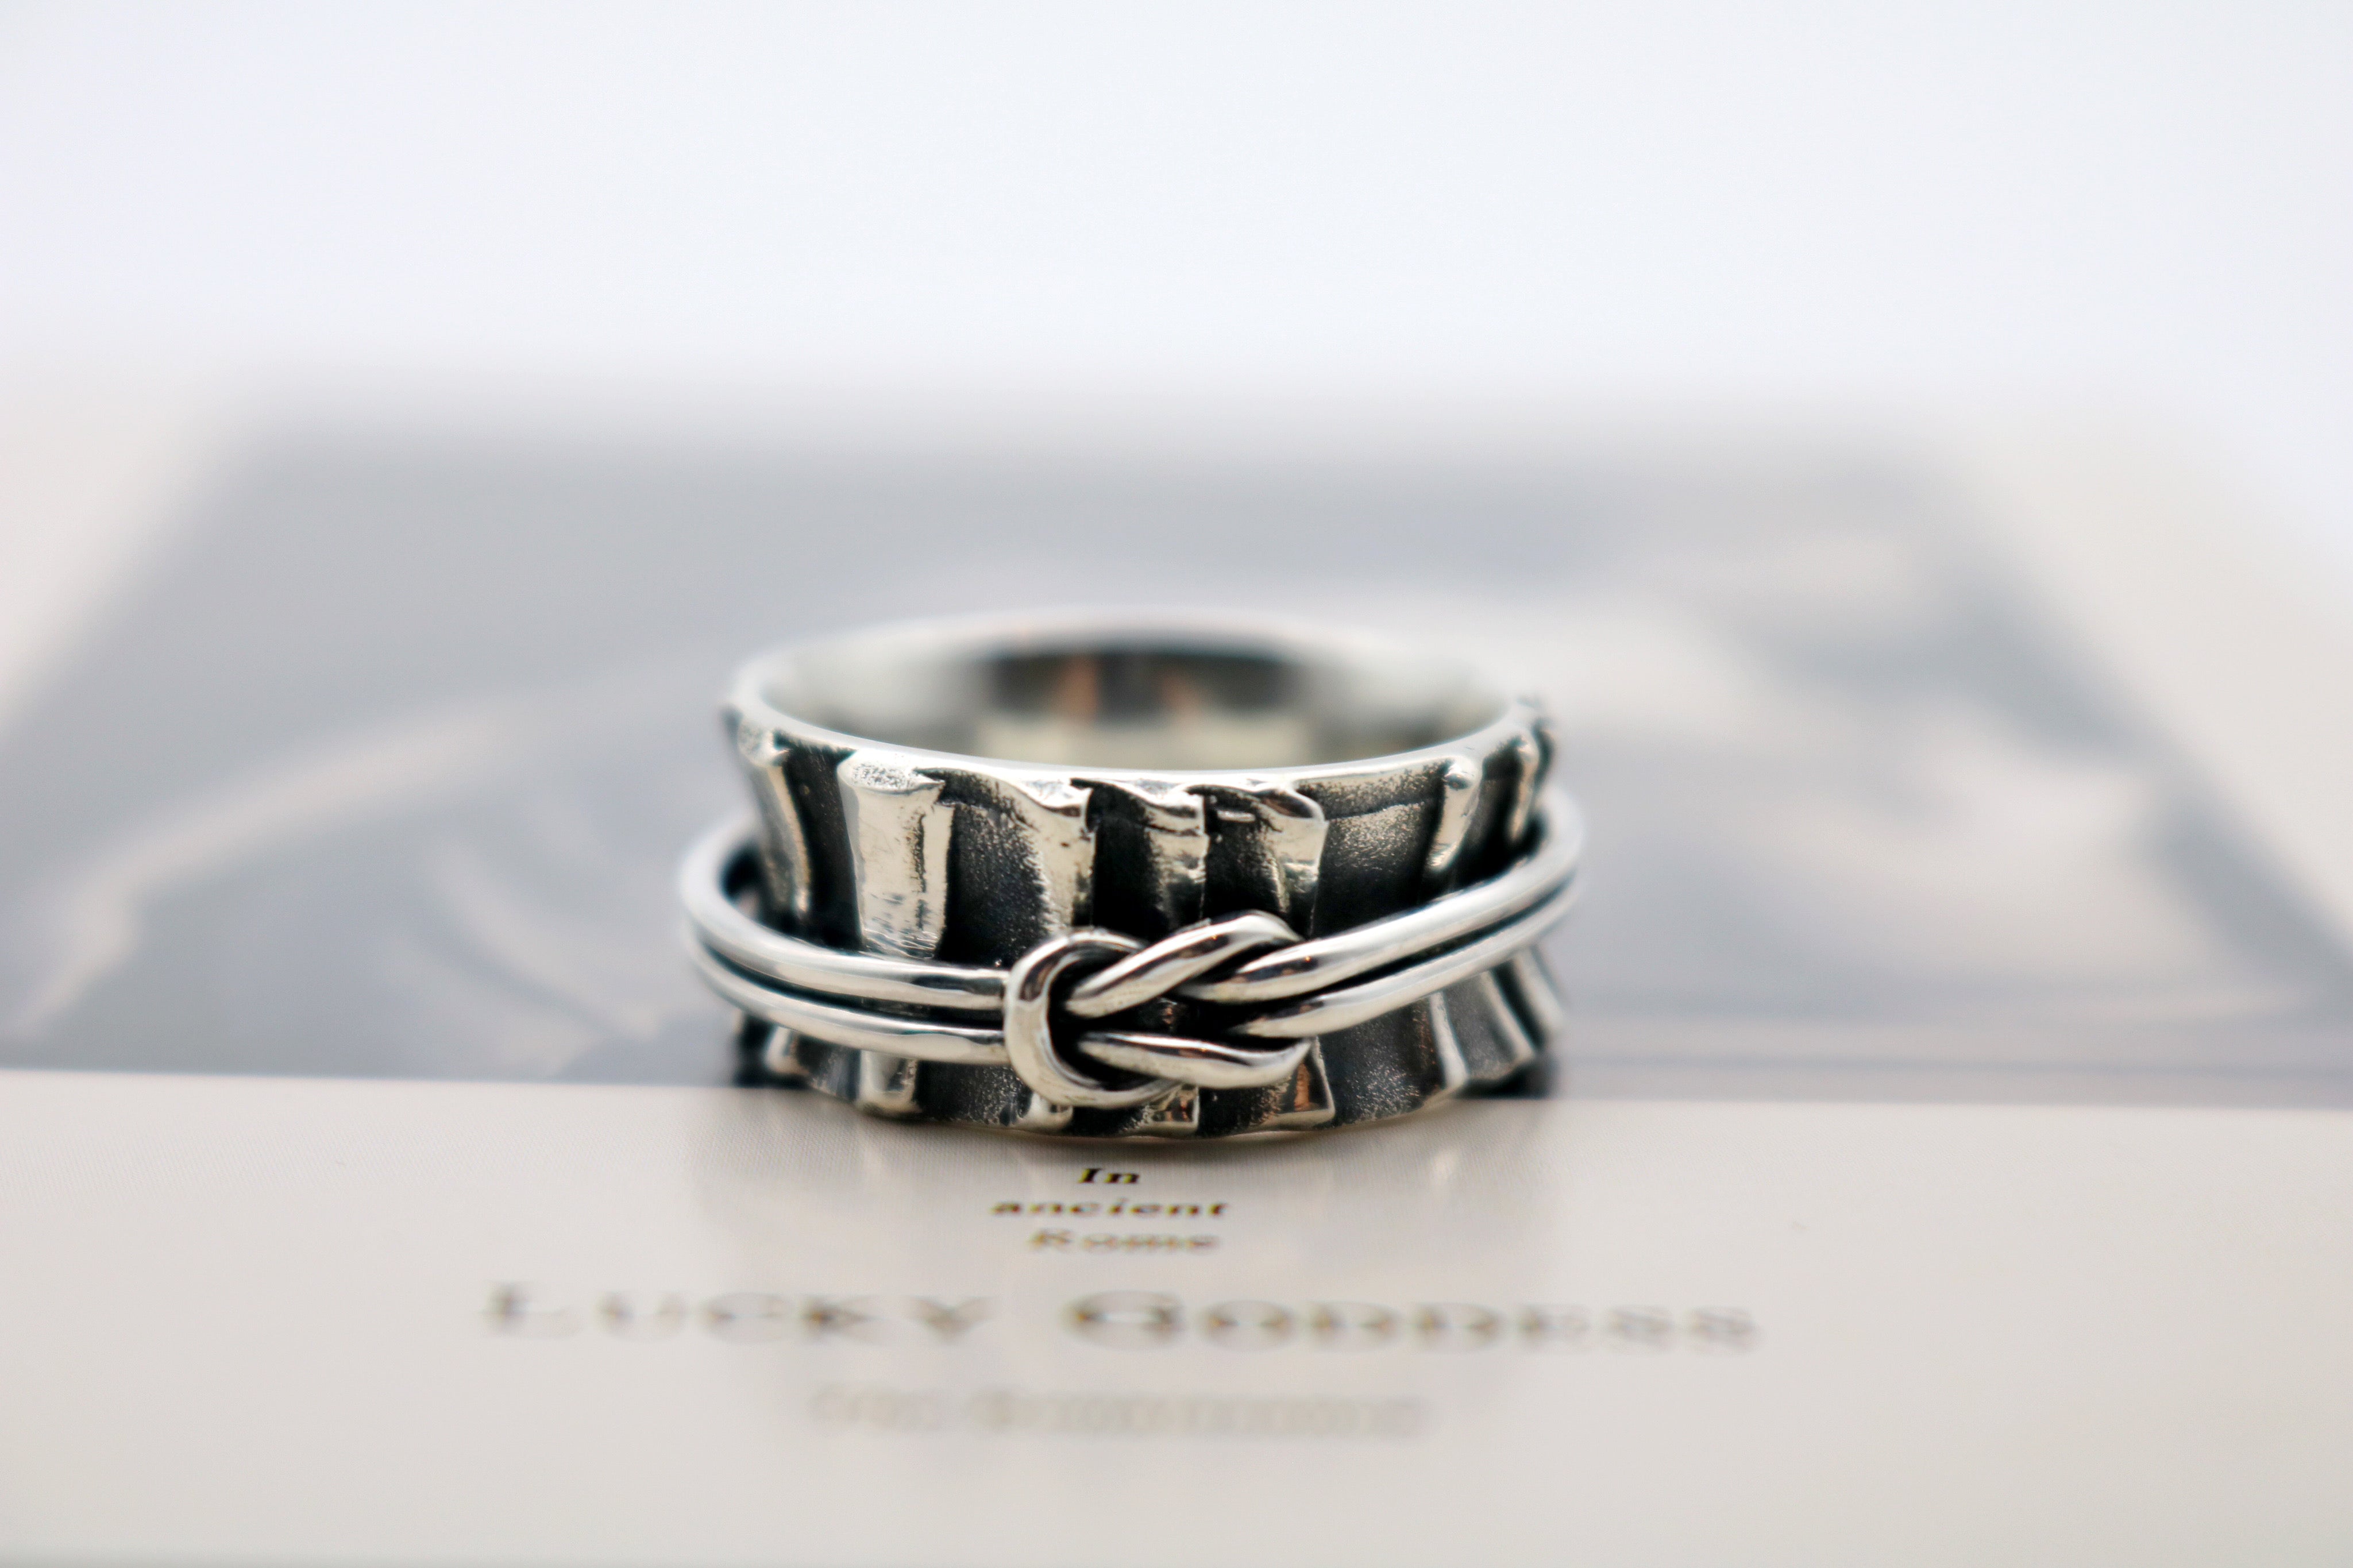 Connected Knot Meditation Spinner Ring Sterling Silver